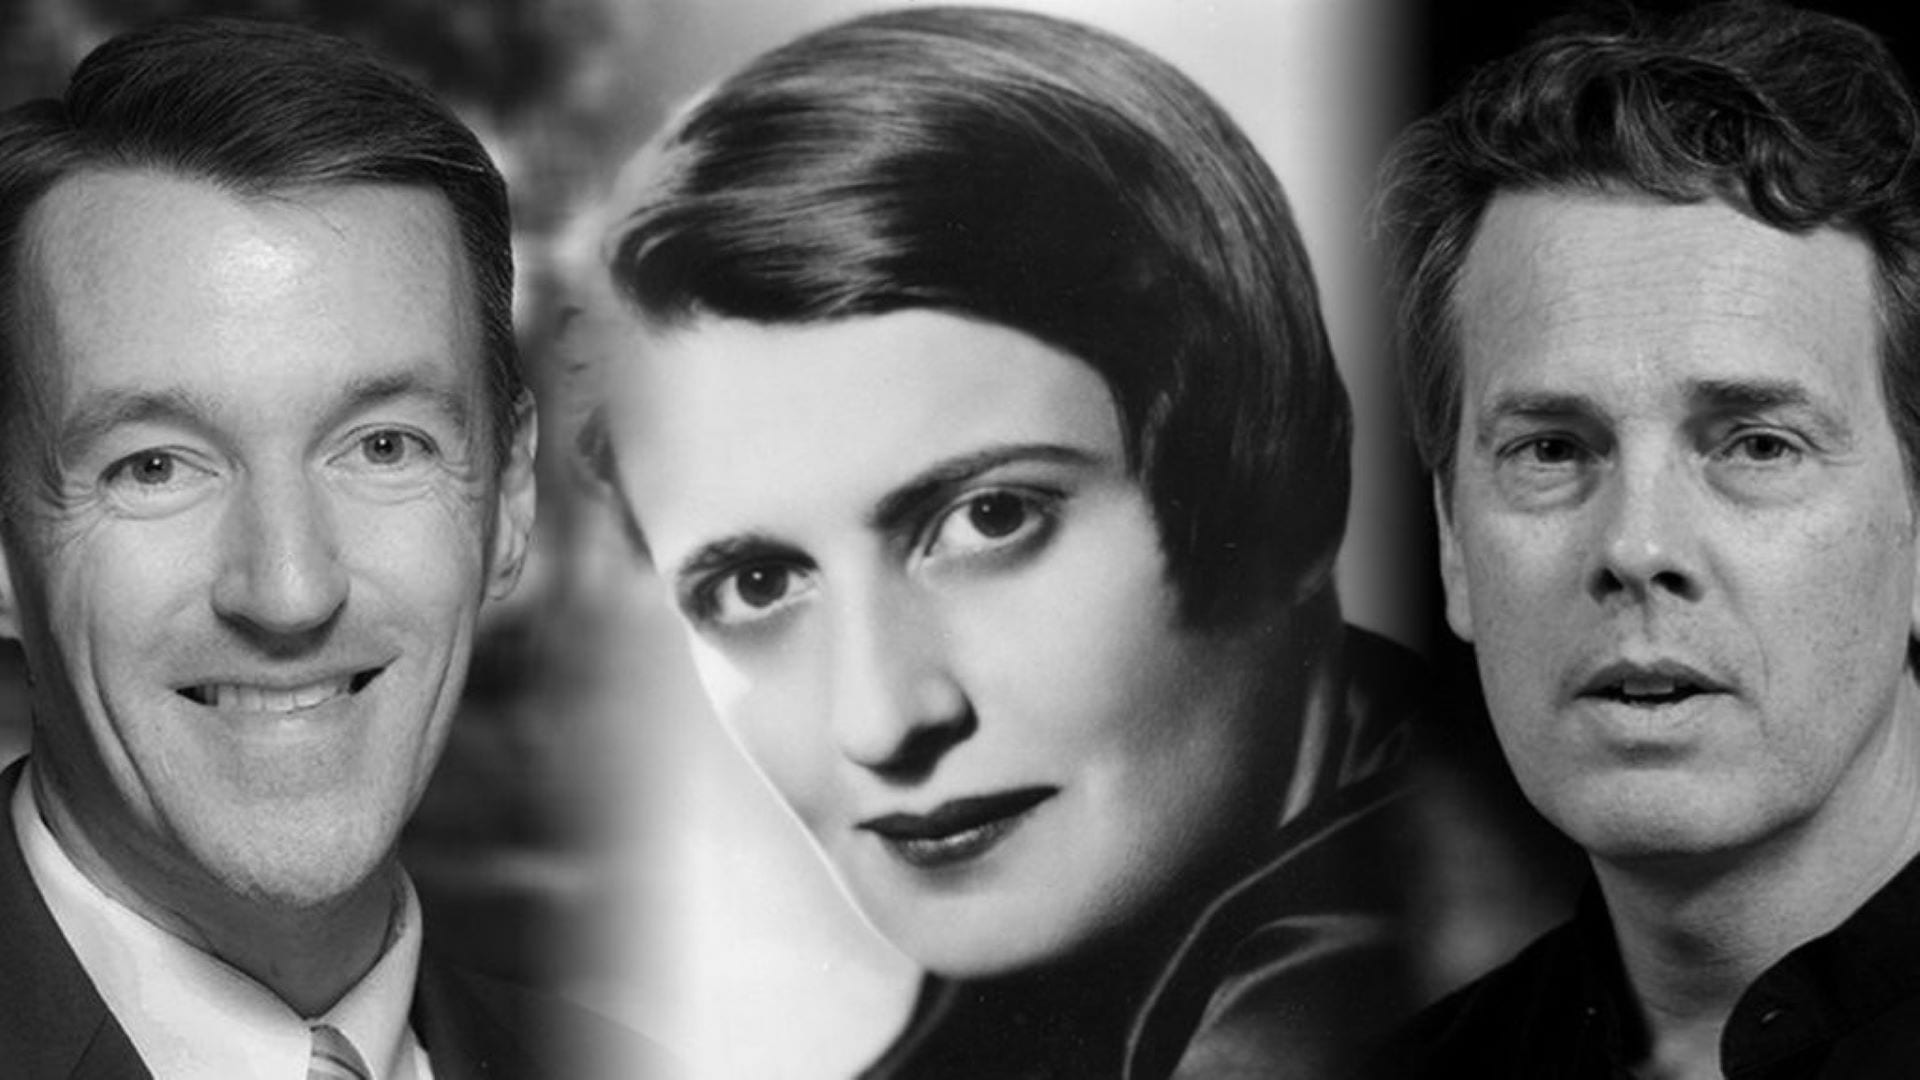 Debate: is Ayn Rand right about rights?